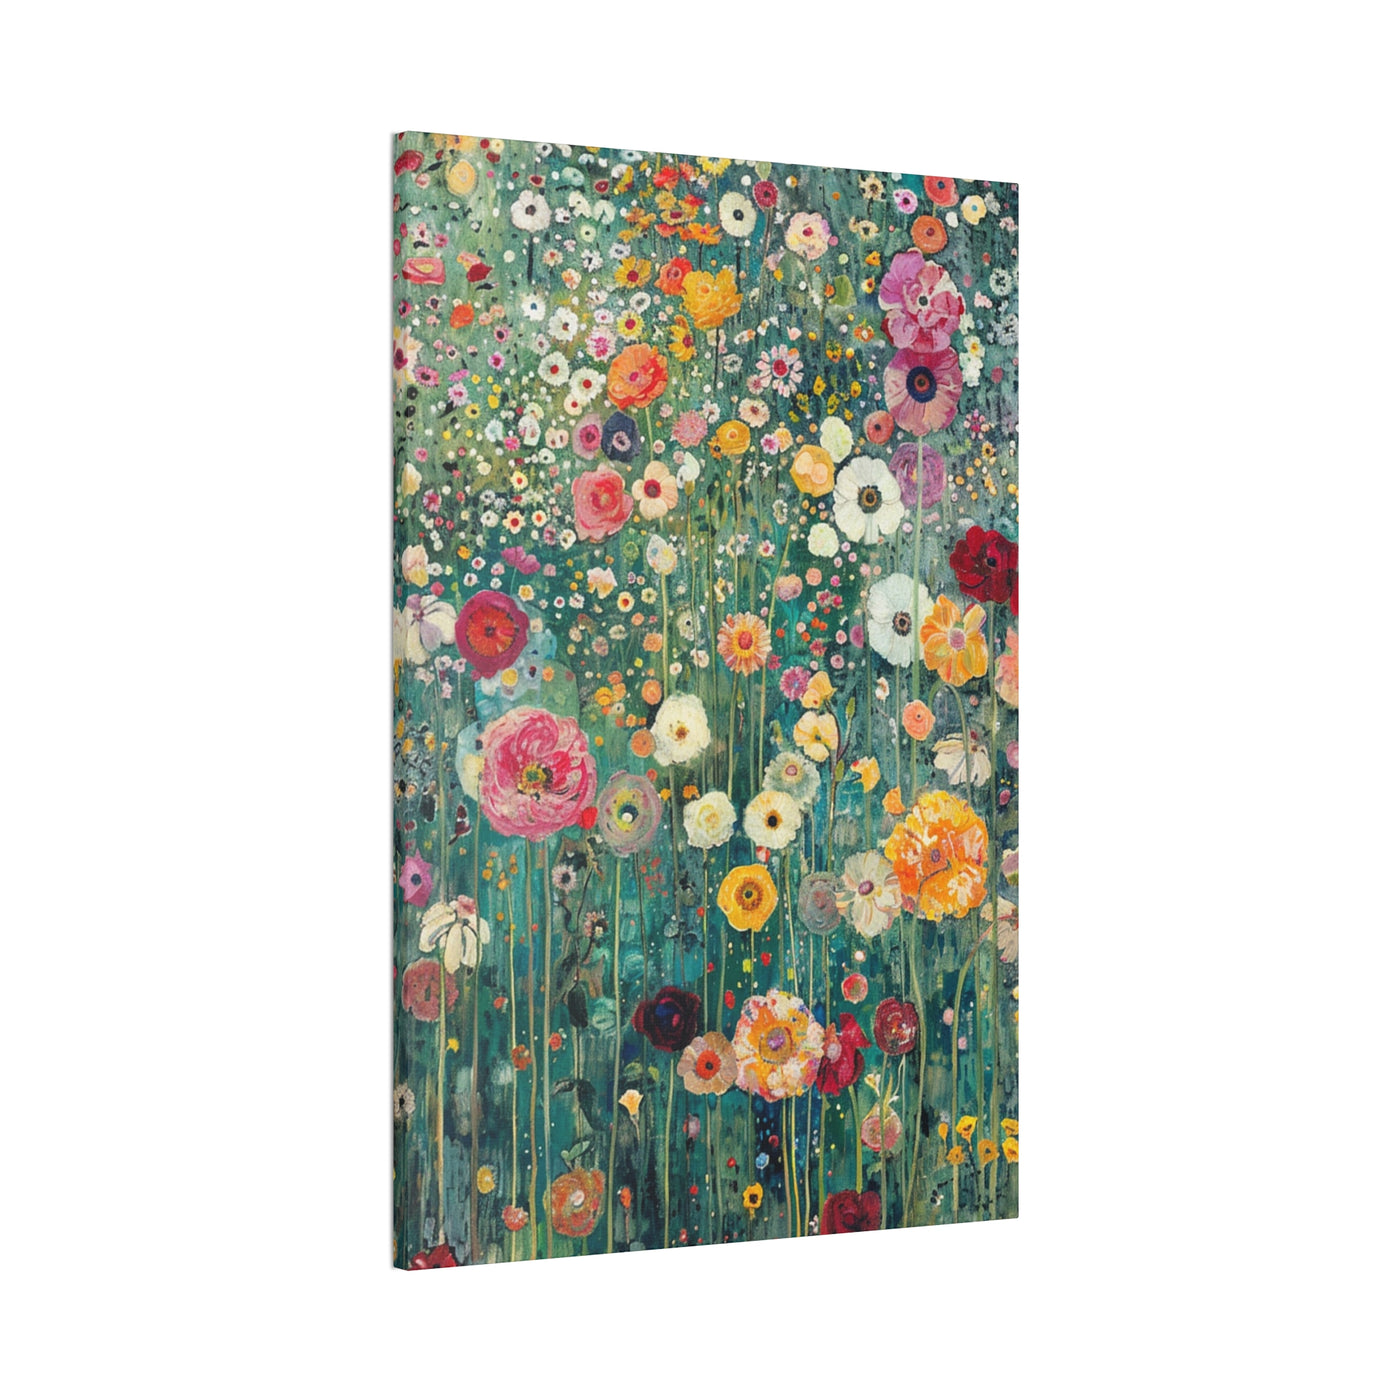 Product image of An Overgrown Floral Garden Dance canvas wall art.